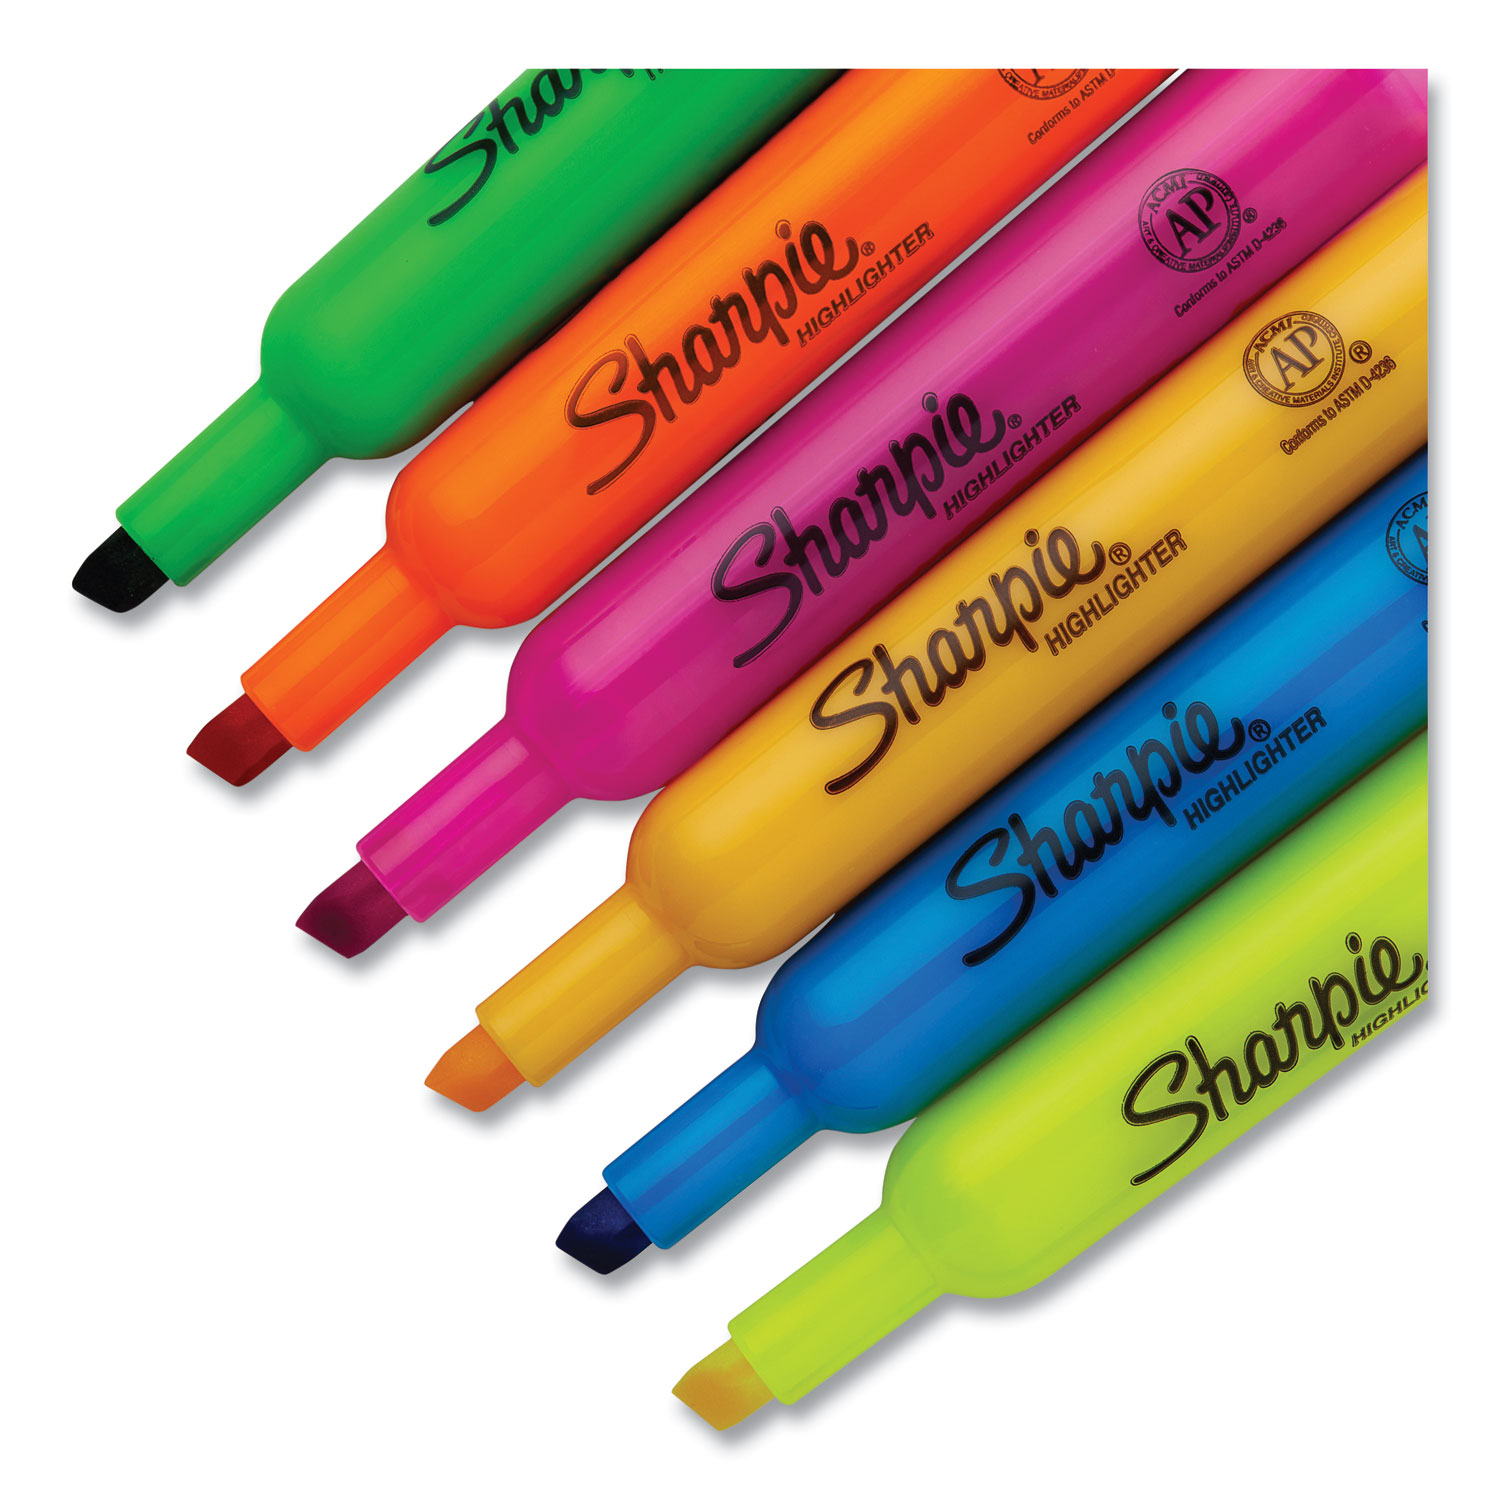 School Smart Tank Style Highlighter Set, Chisel Tip, Assorted Colors, Set of 20